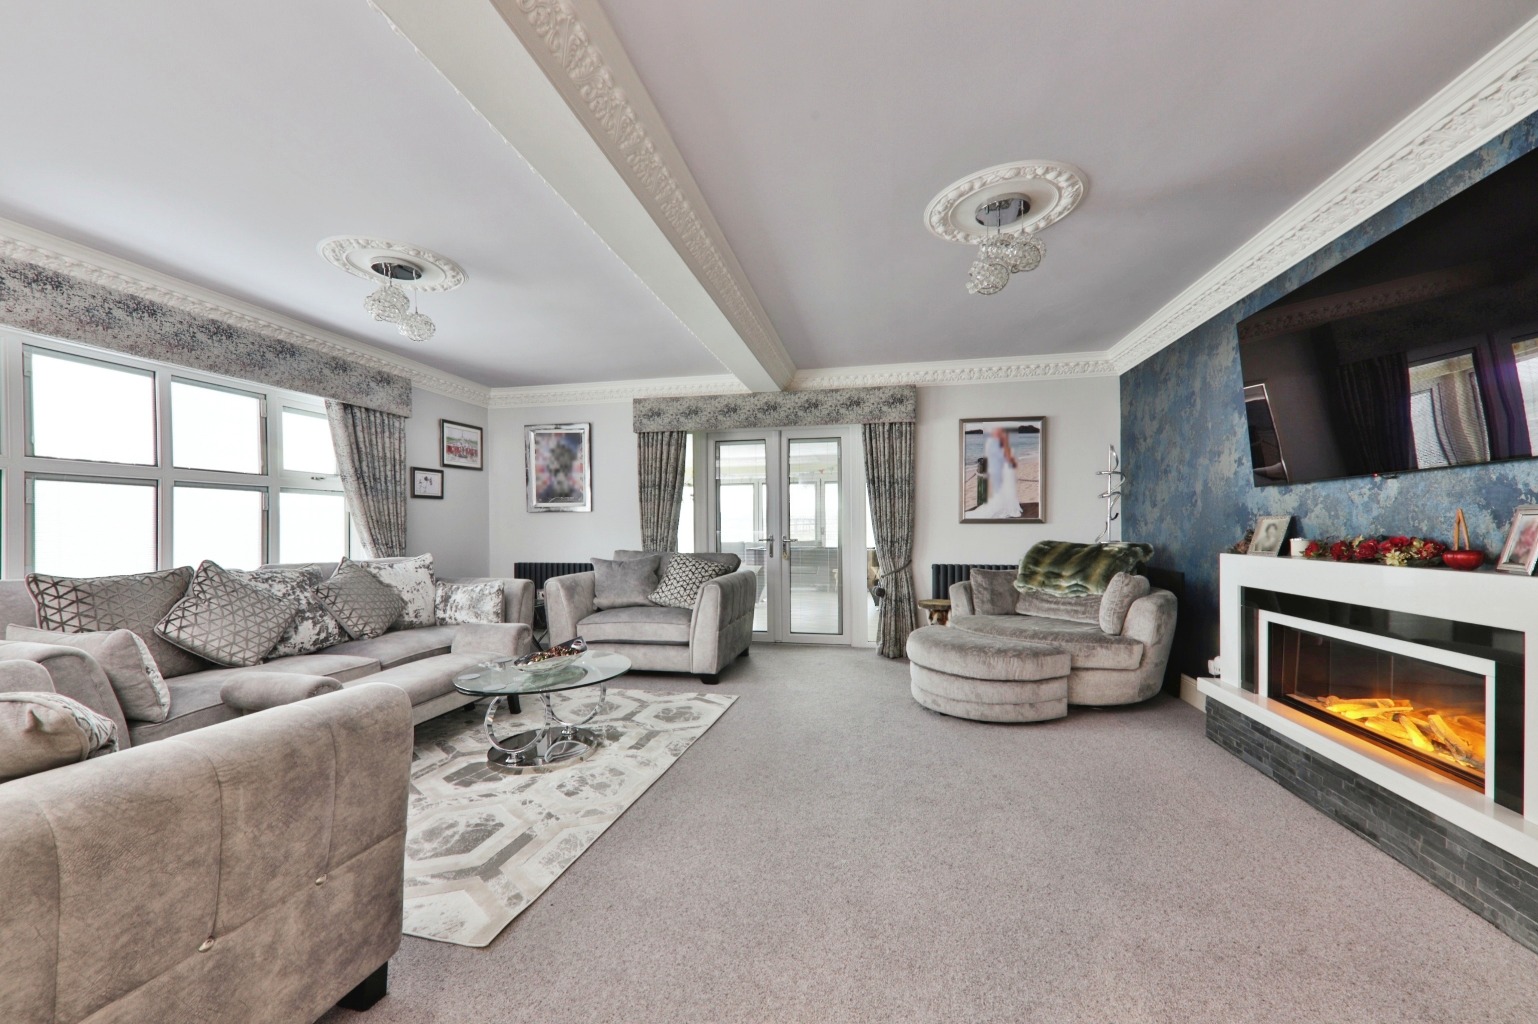 4 bed detached house for sale in Malton Road, Beverley  - Property Image 3